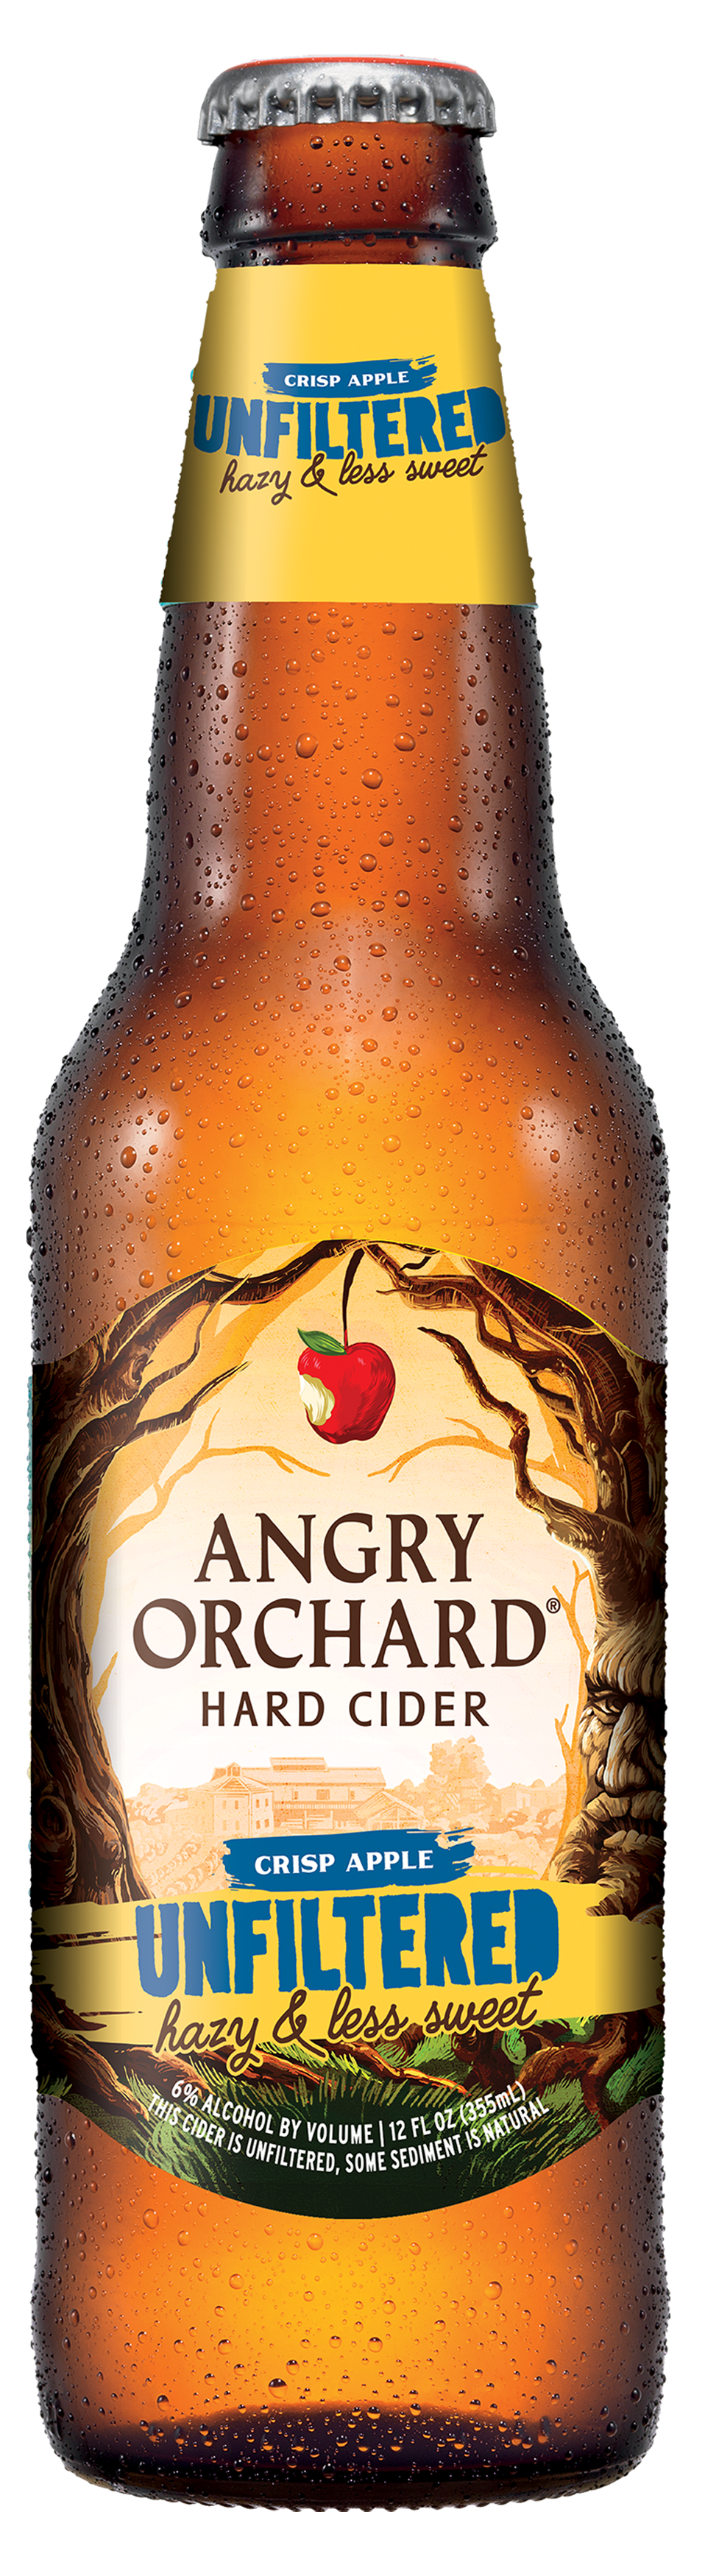 Angry Orchard Unfiltered Hard Cider